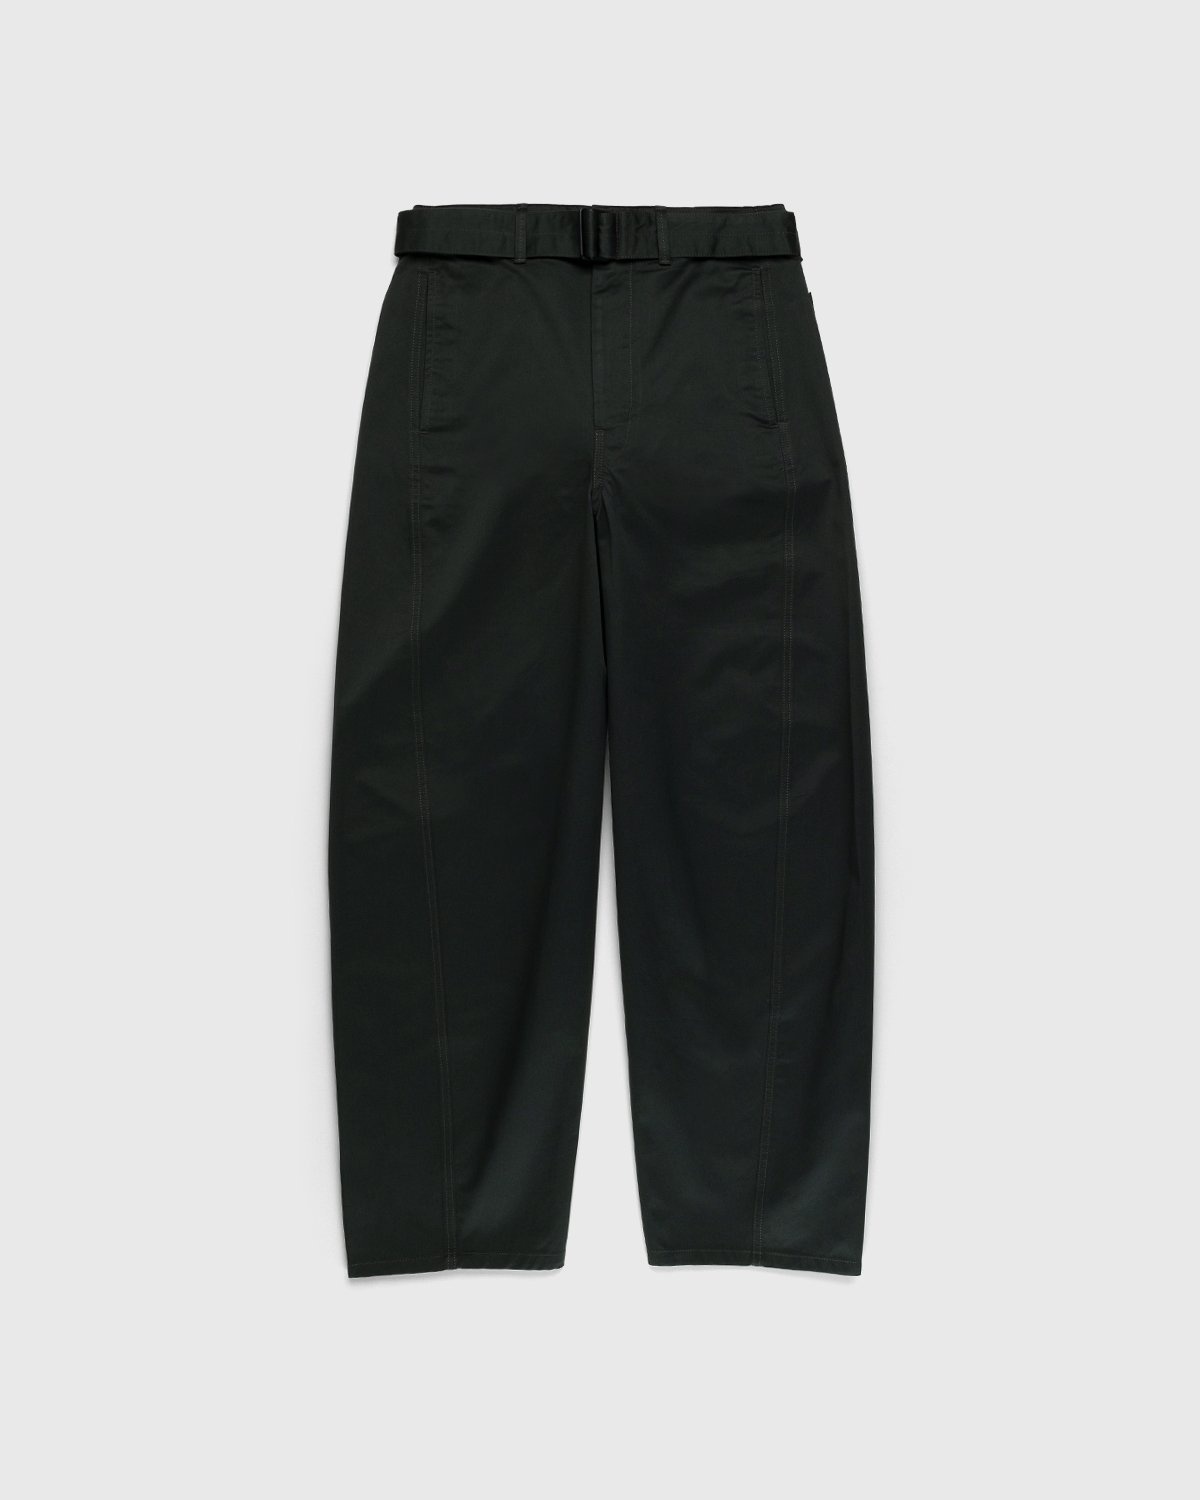 Lemaire – Twisted Belted Pants Dark Slate Green - Trousers - Grey - Image 1